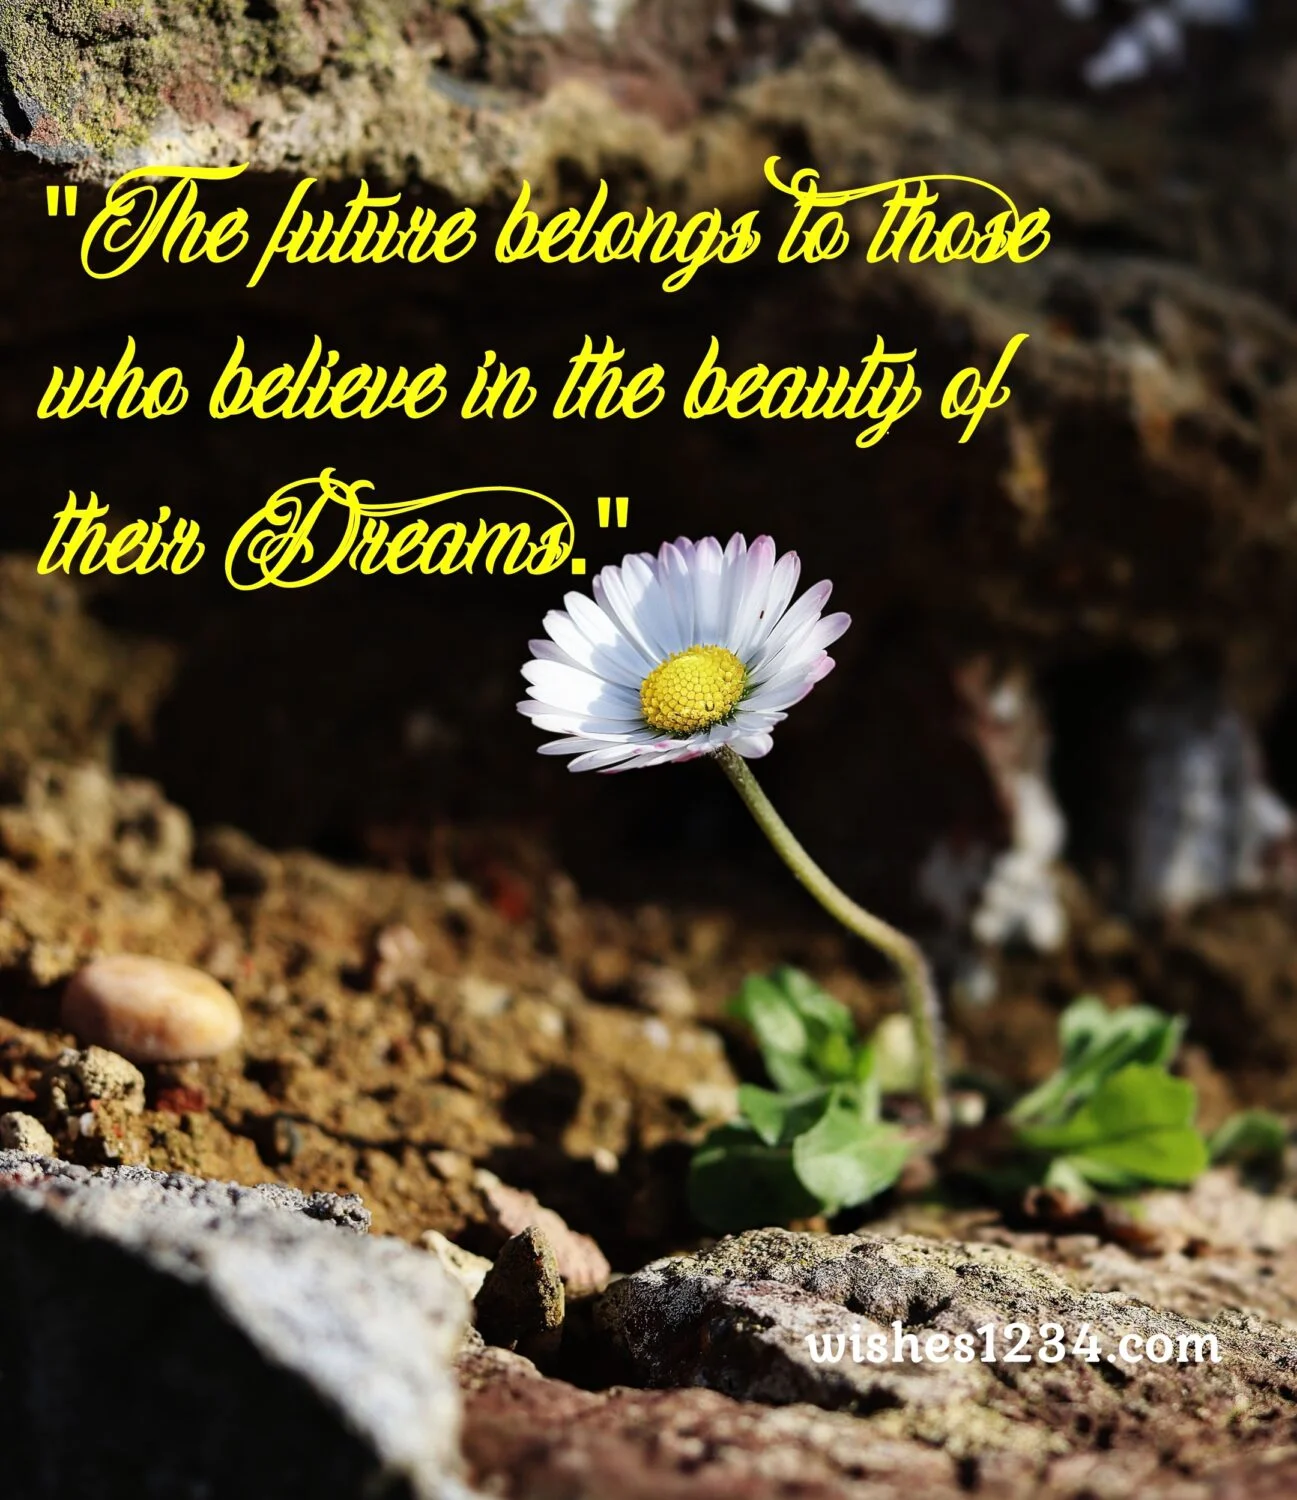 Daisy flower in wild rock, Super motivational quotes | Unique quotes on life.